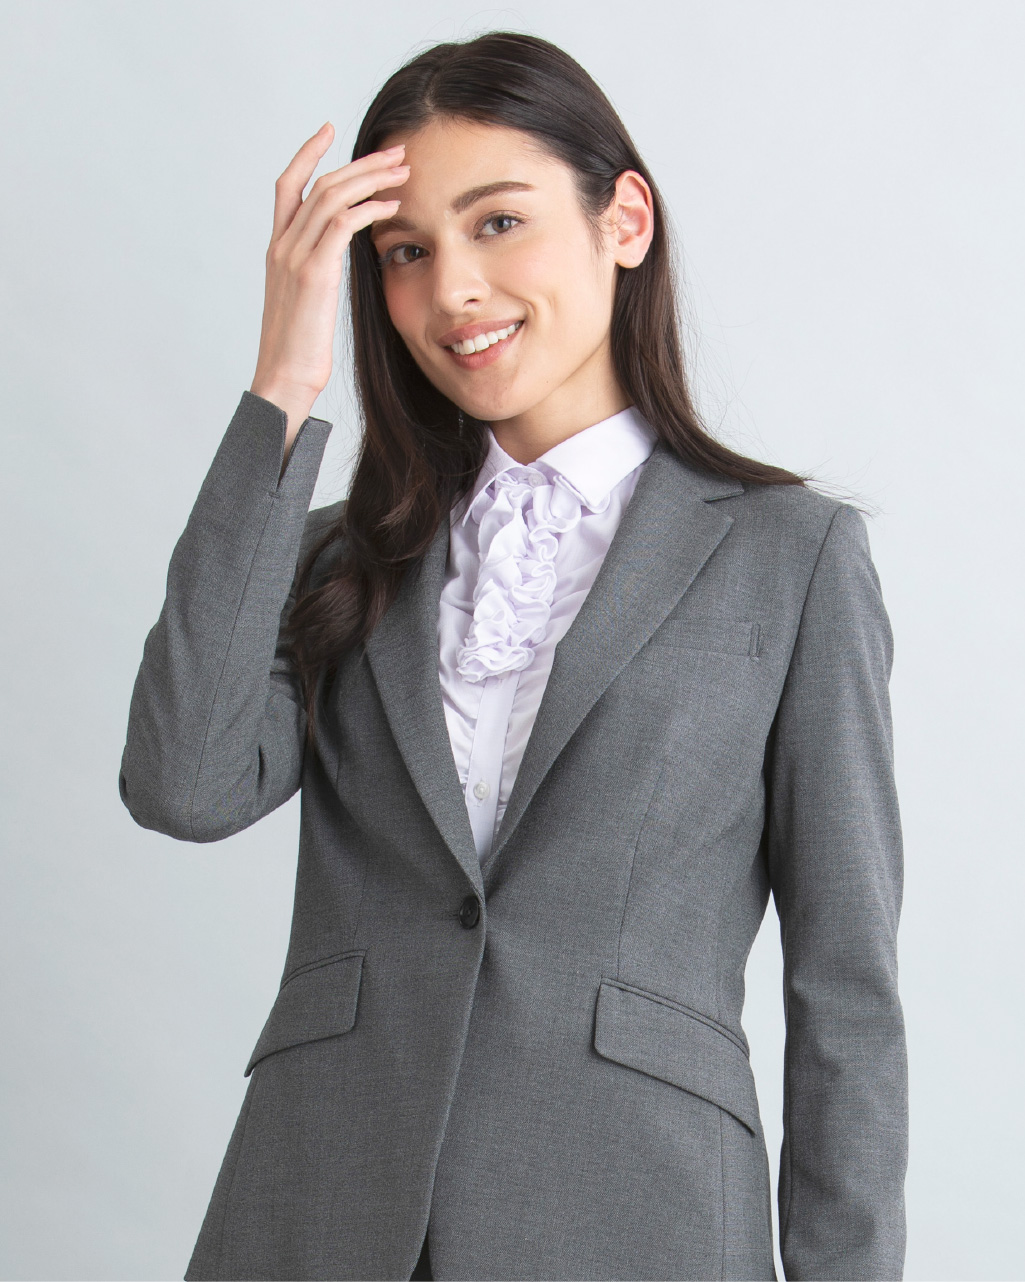 GRAY SUIT STYLE